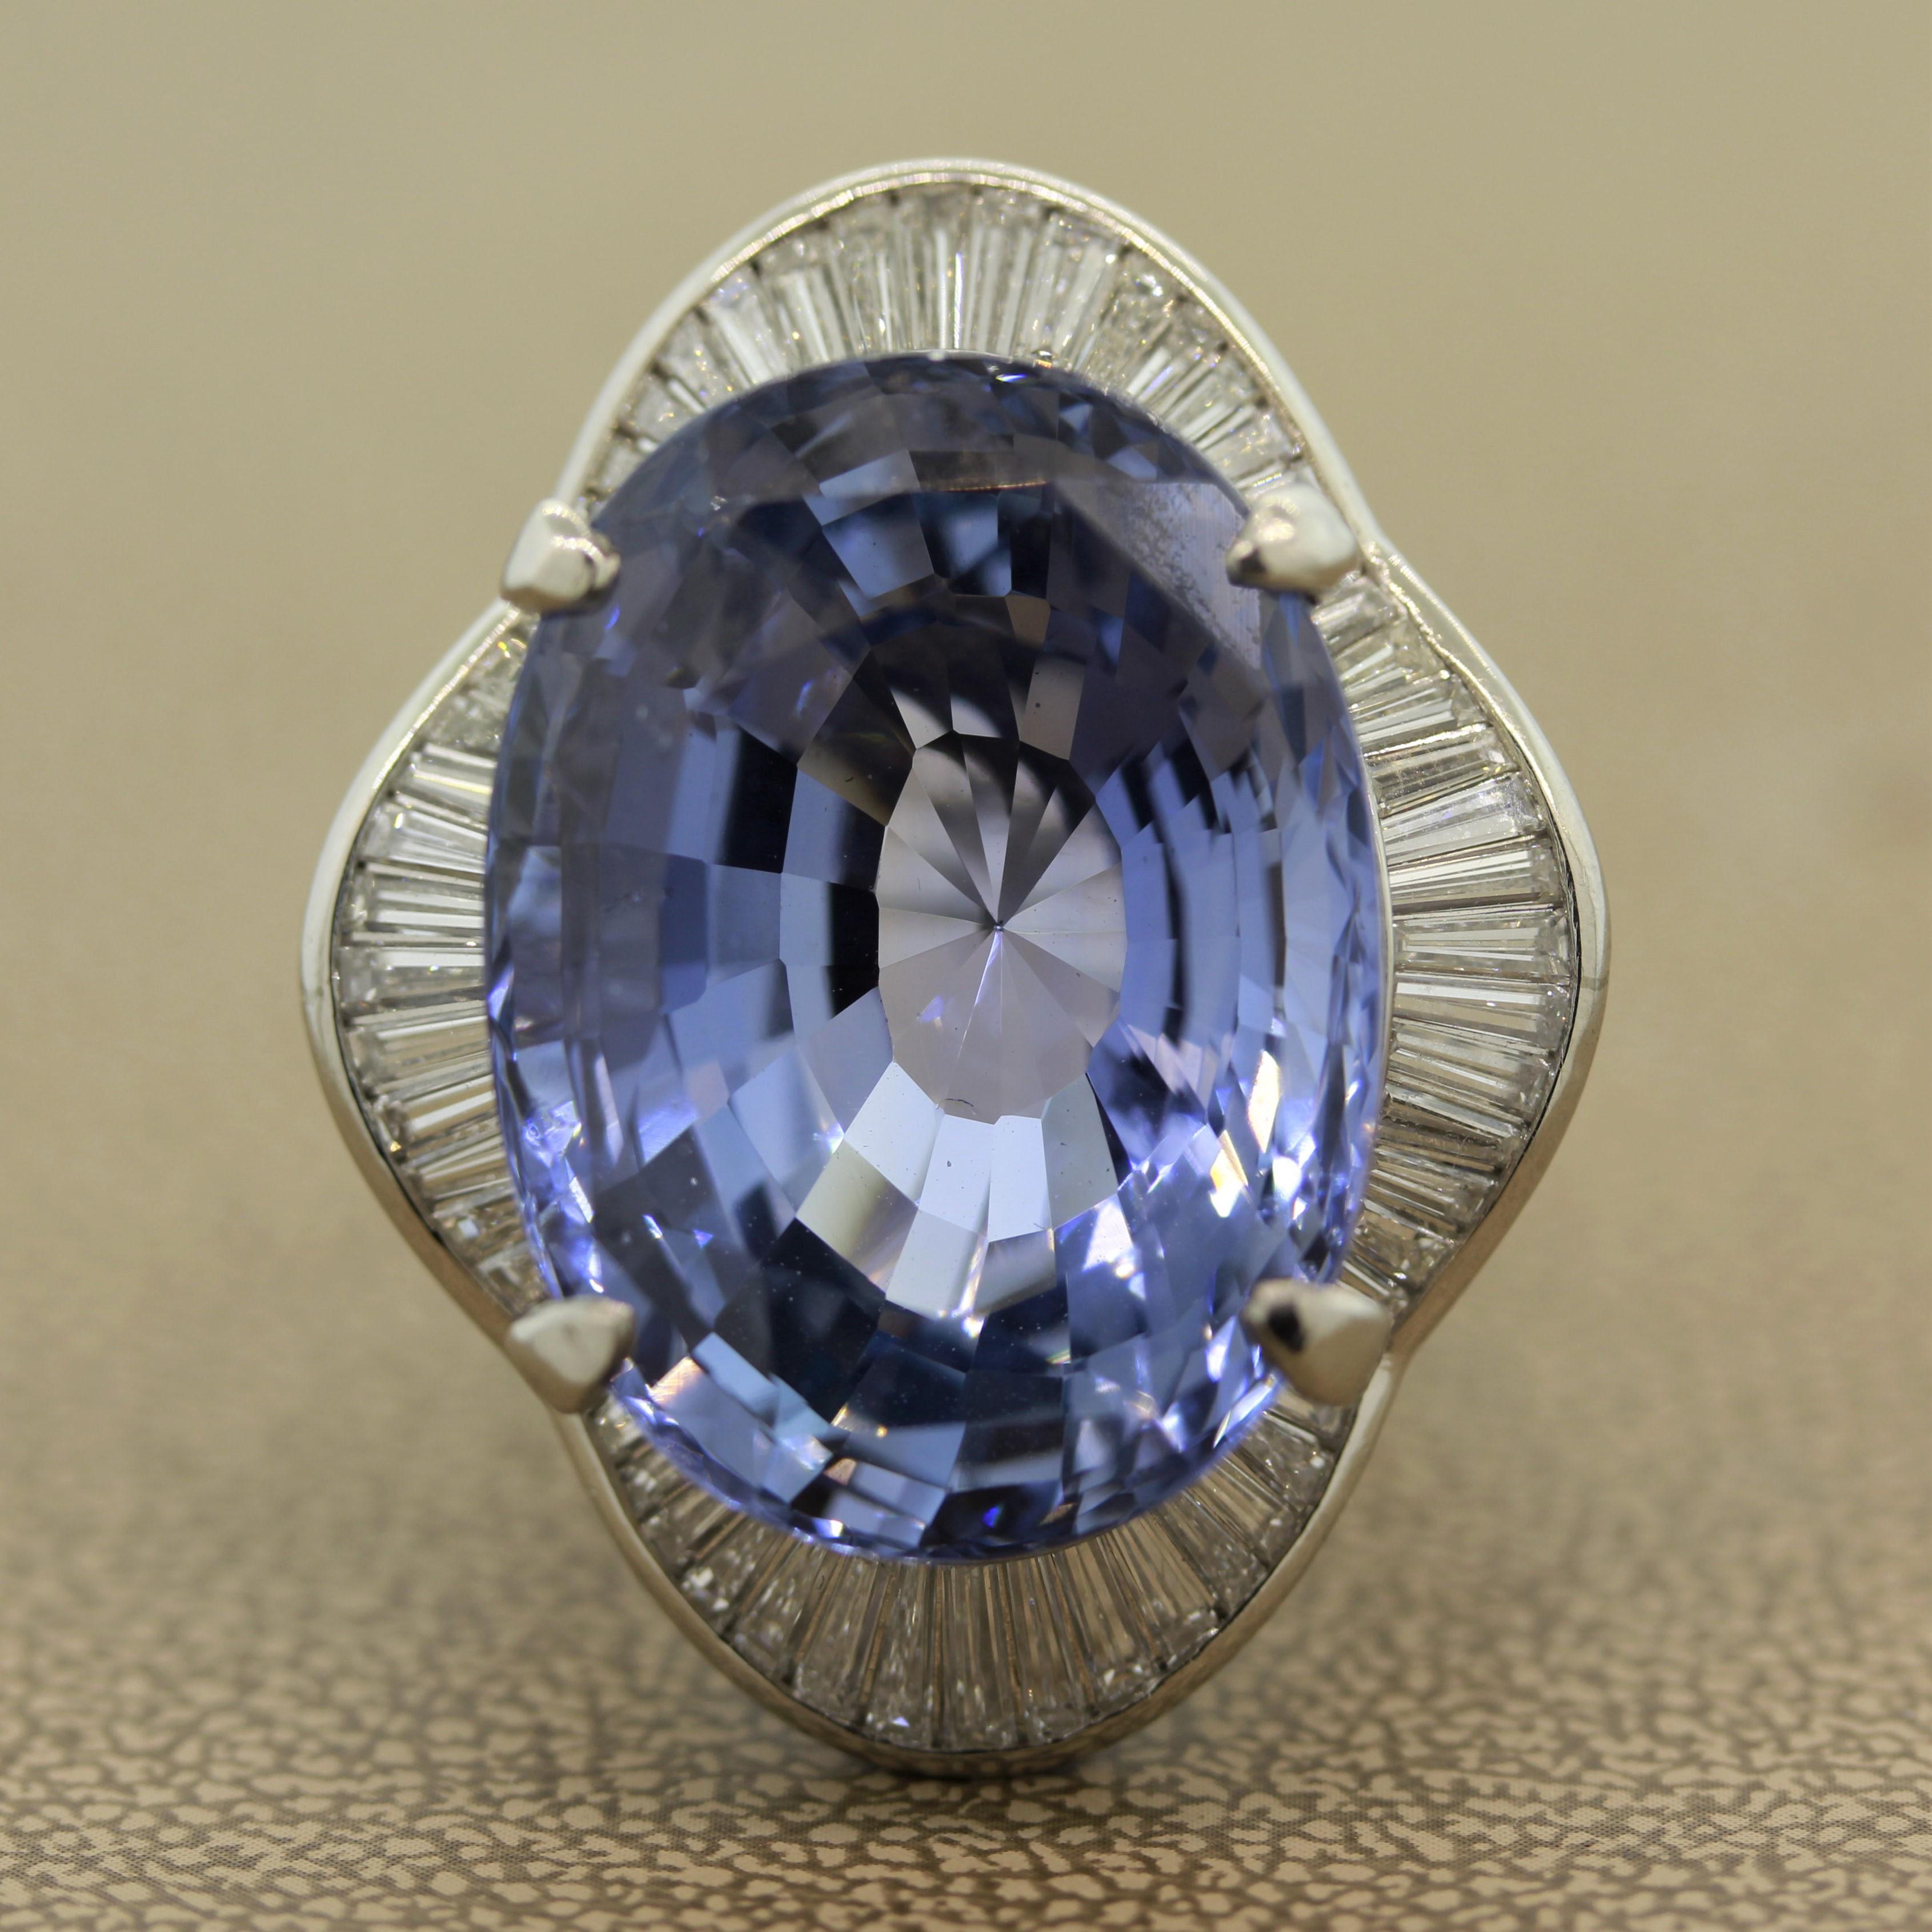 A very special stone from Ceylon (Sri Lanka) weighing an incredible 41.16 carats. It is certified by the GIA as natural with no treatment. It has a soft sky-blue color that is perfectly even. Additionally, the sapphire is eye clean with no visible